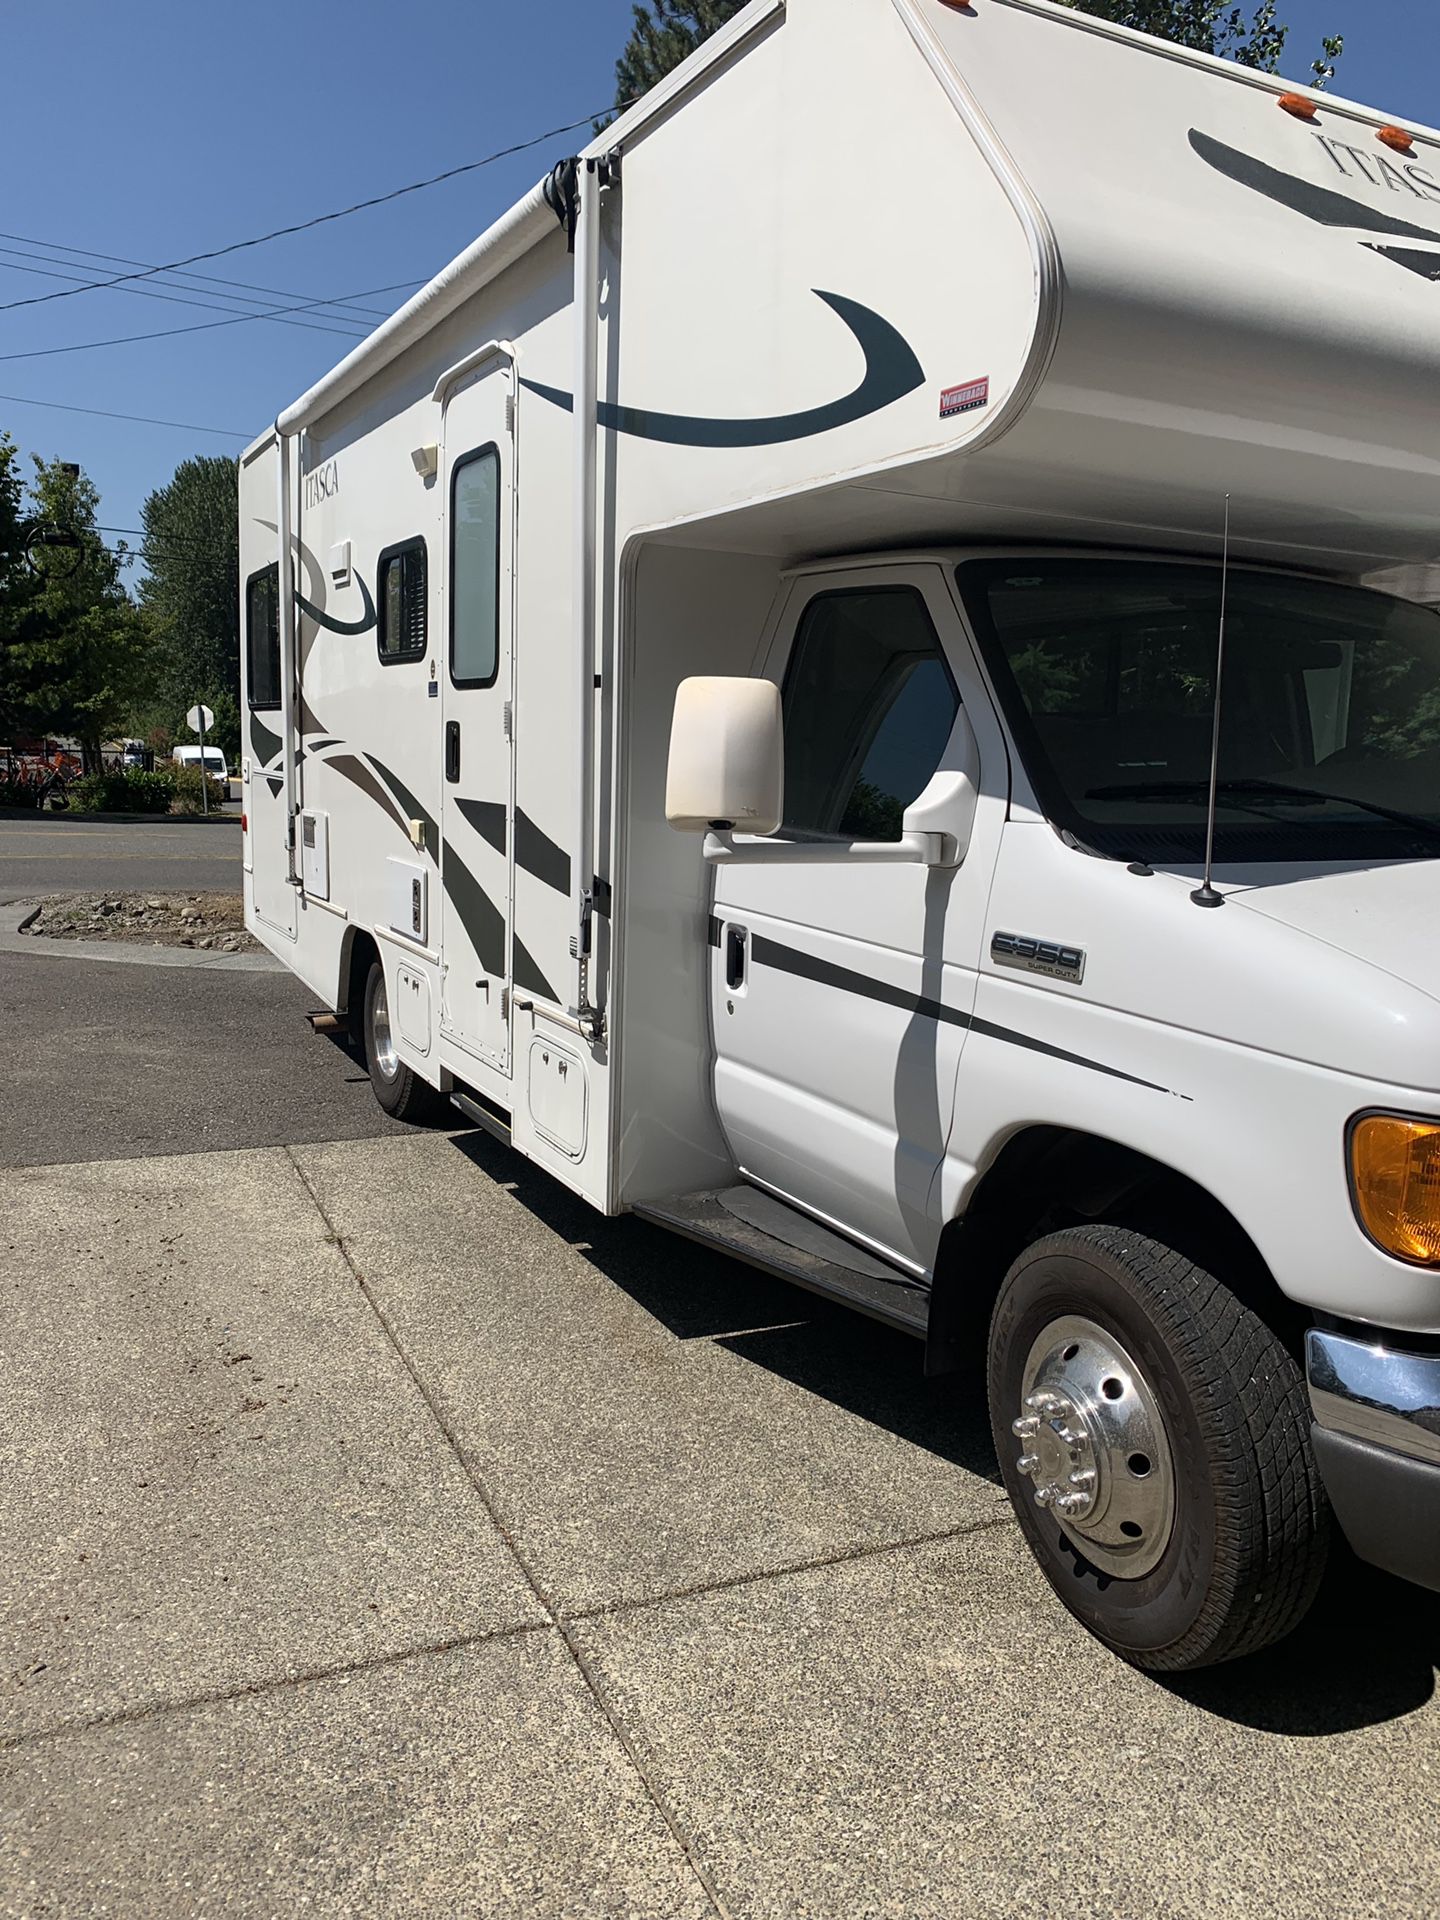 07 Itaska 24 1/2 foot rear bed Super clean super nice low miles immaculate